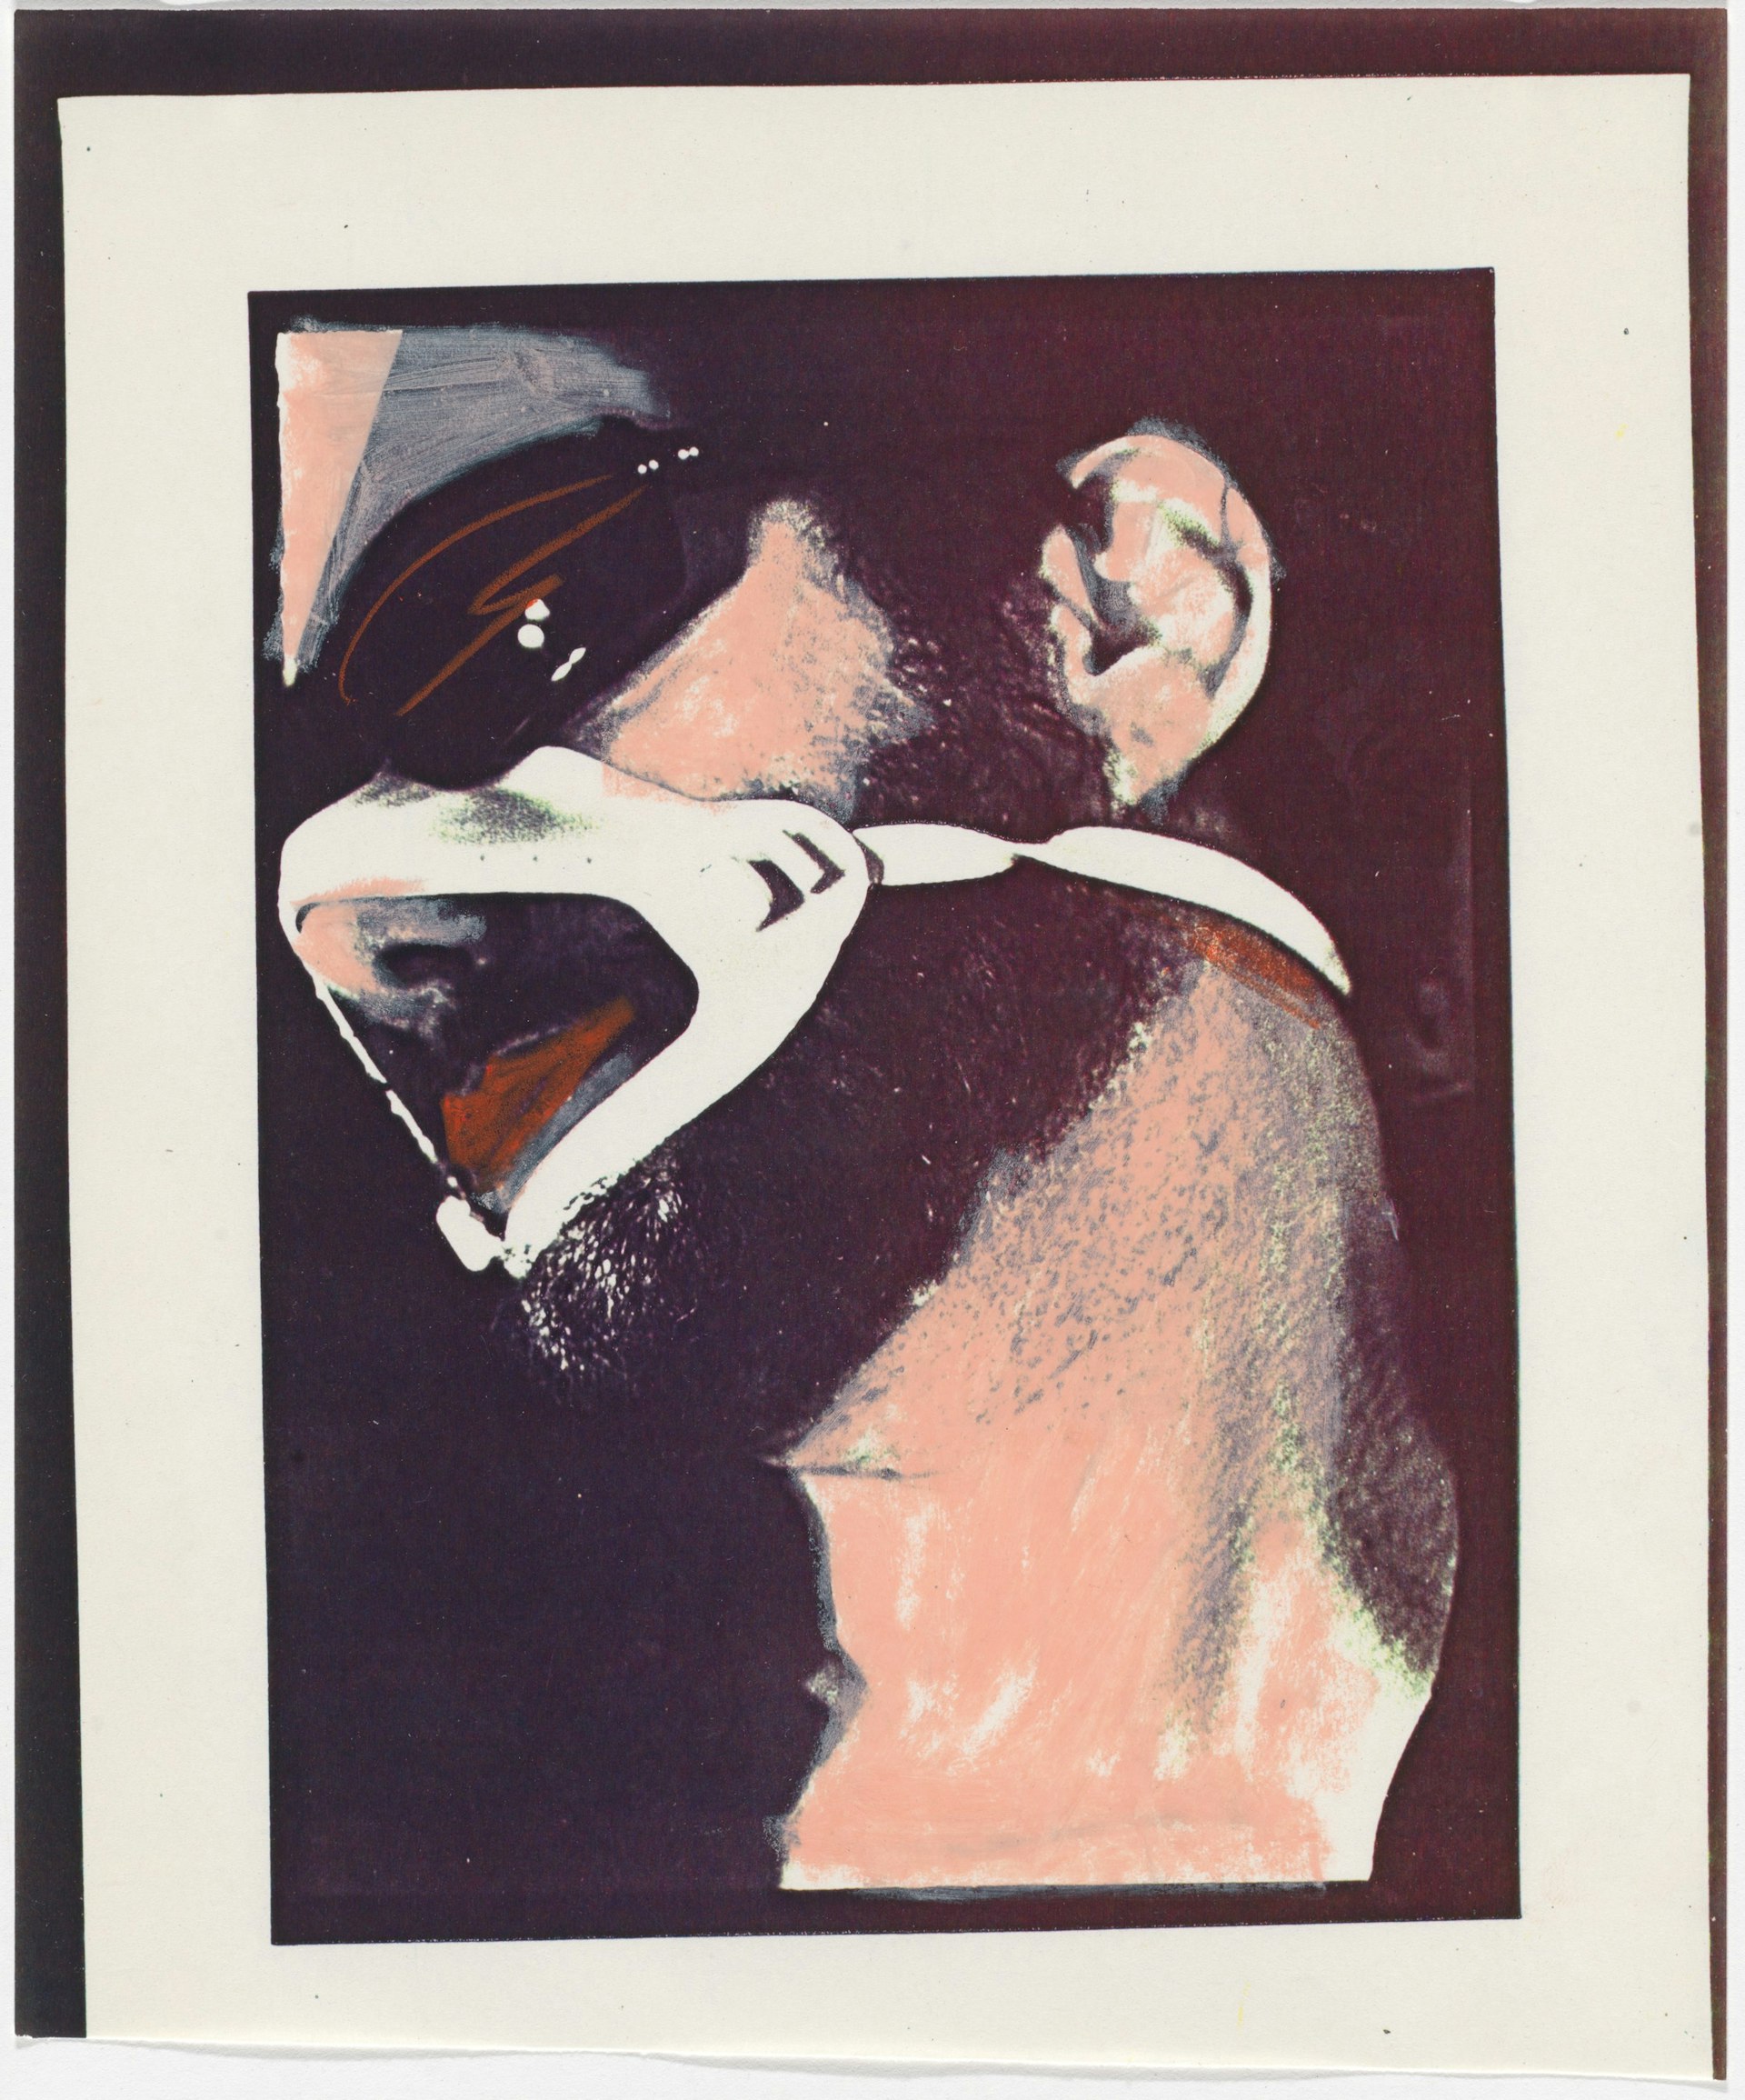 Anney Bonney (American, born 1949). Process art from Shattered (Male Bondage: Carl Apfelschnitt), 1978–79. Xerox collage. The Museum of Modern Art, New York. Department of Film Special Collections